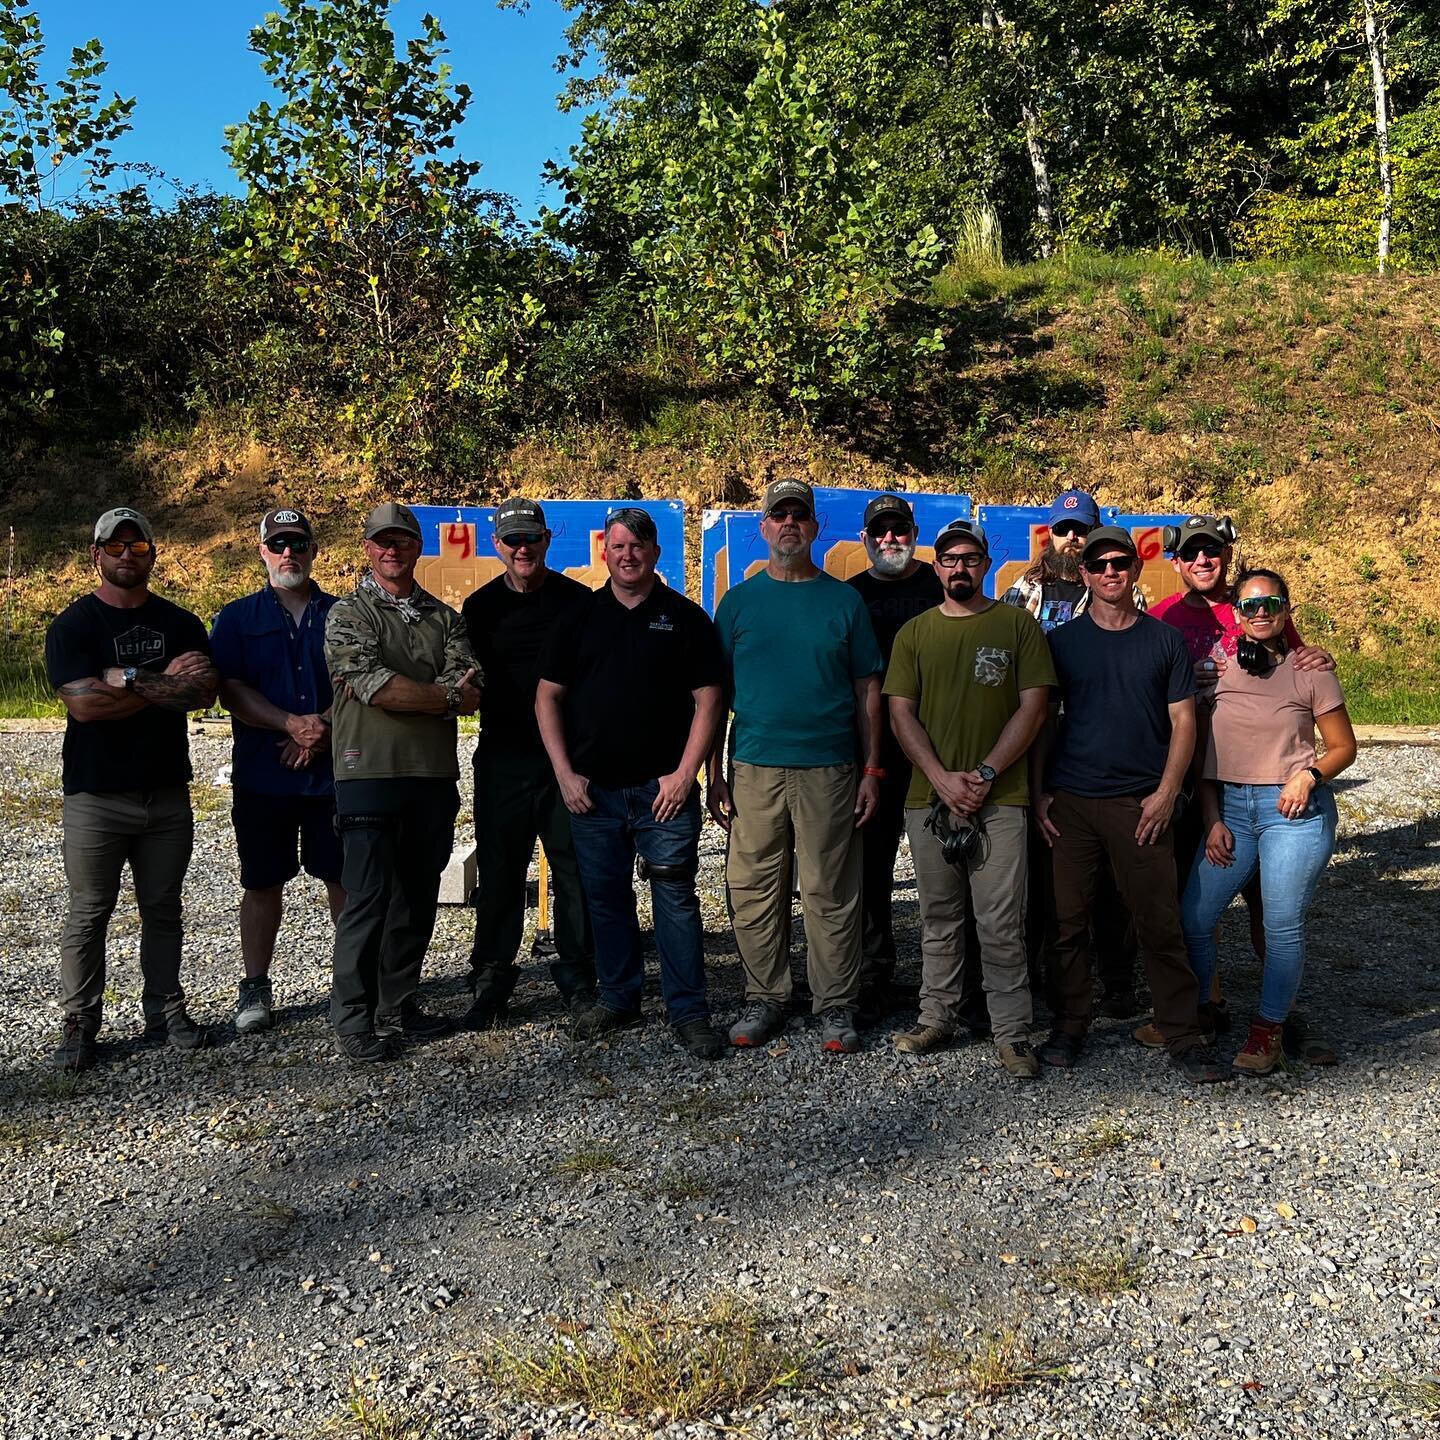 Class photo from this past weekends CCA course in Dickson, TN. Great times, great people. 
__________

@actiontarget #targets #baersolutions #concealed #concealedcarry #cca #tn #iwb #dte #zedo